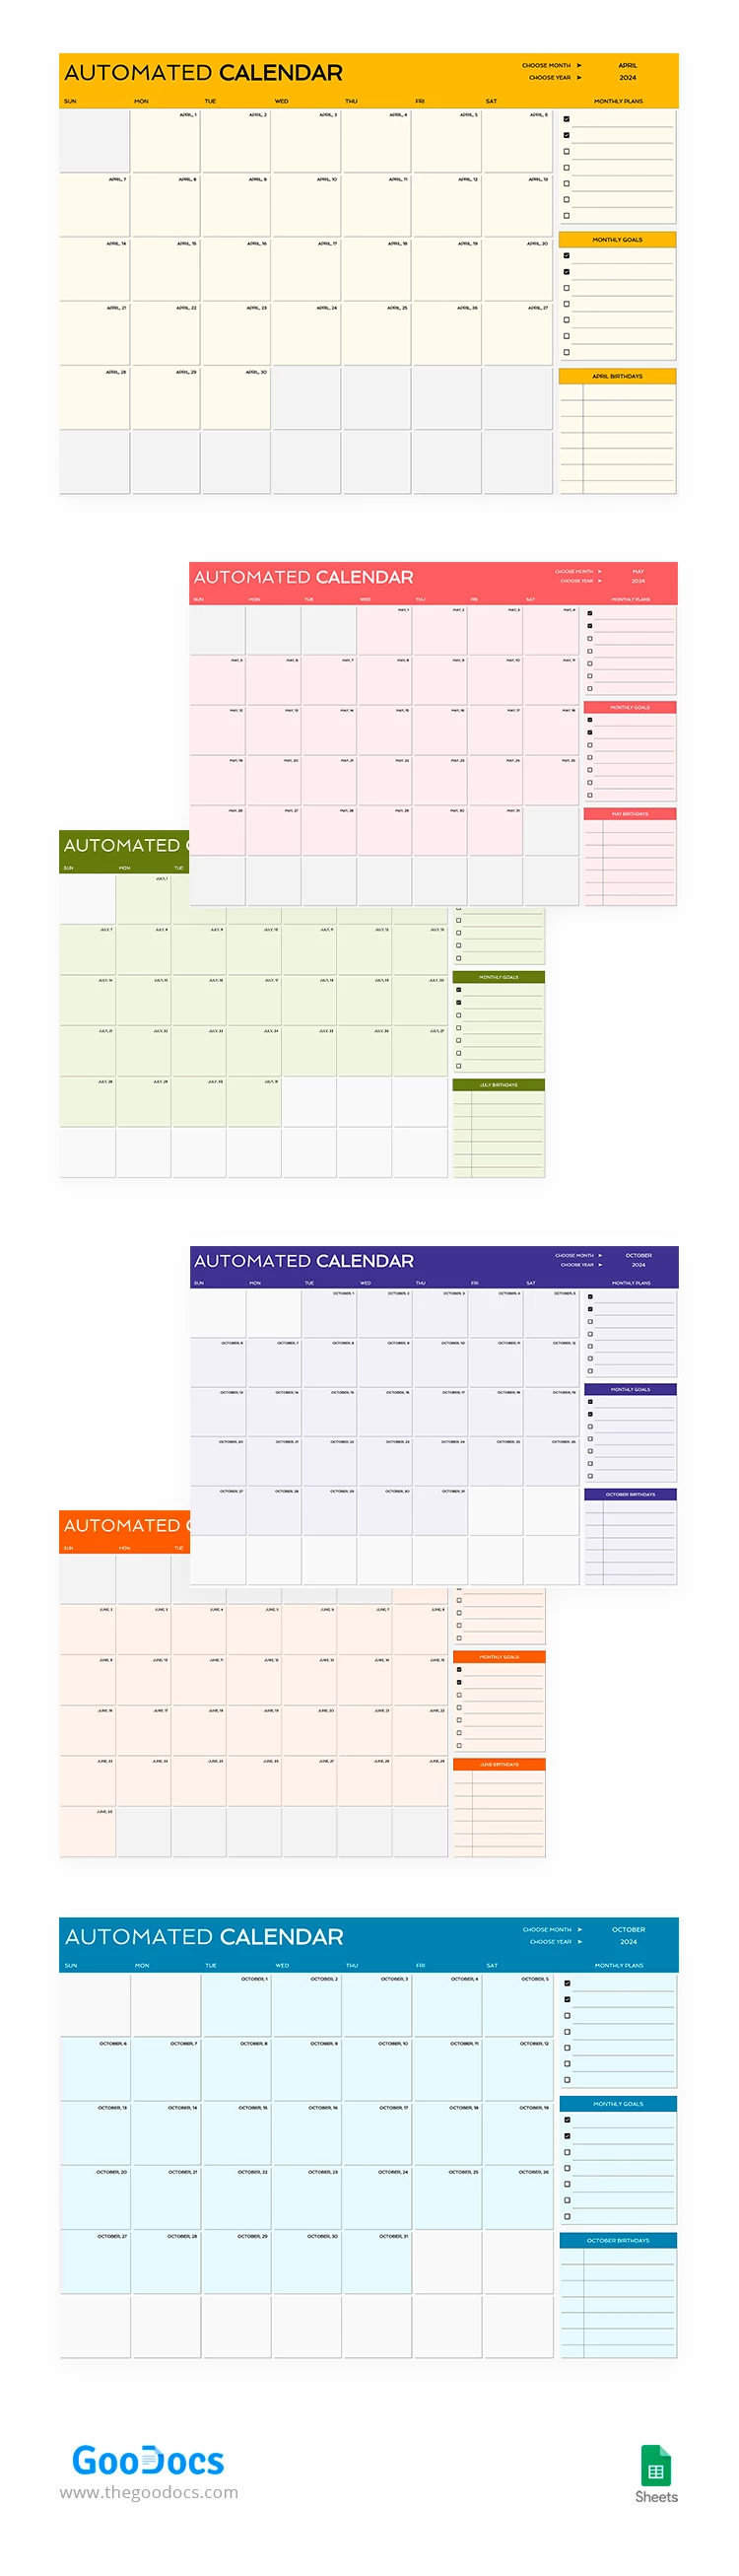 Automated Monthly Calendar - free Google Docs Template - 10068628